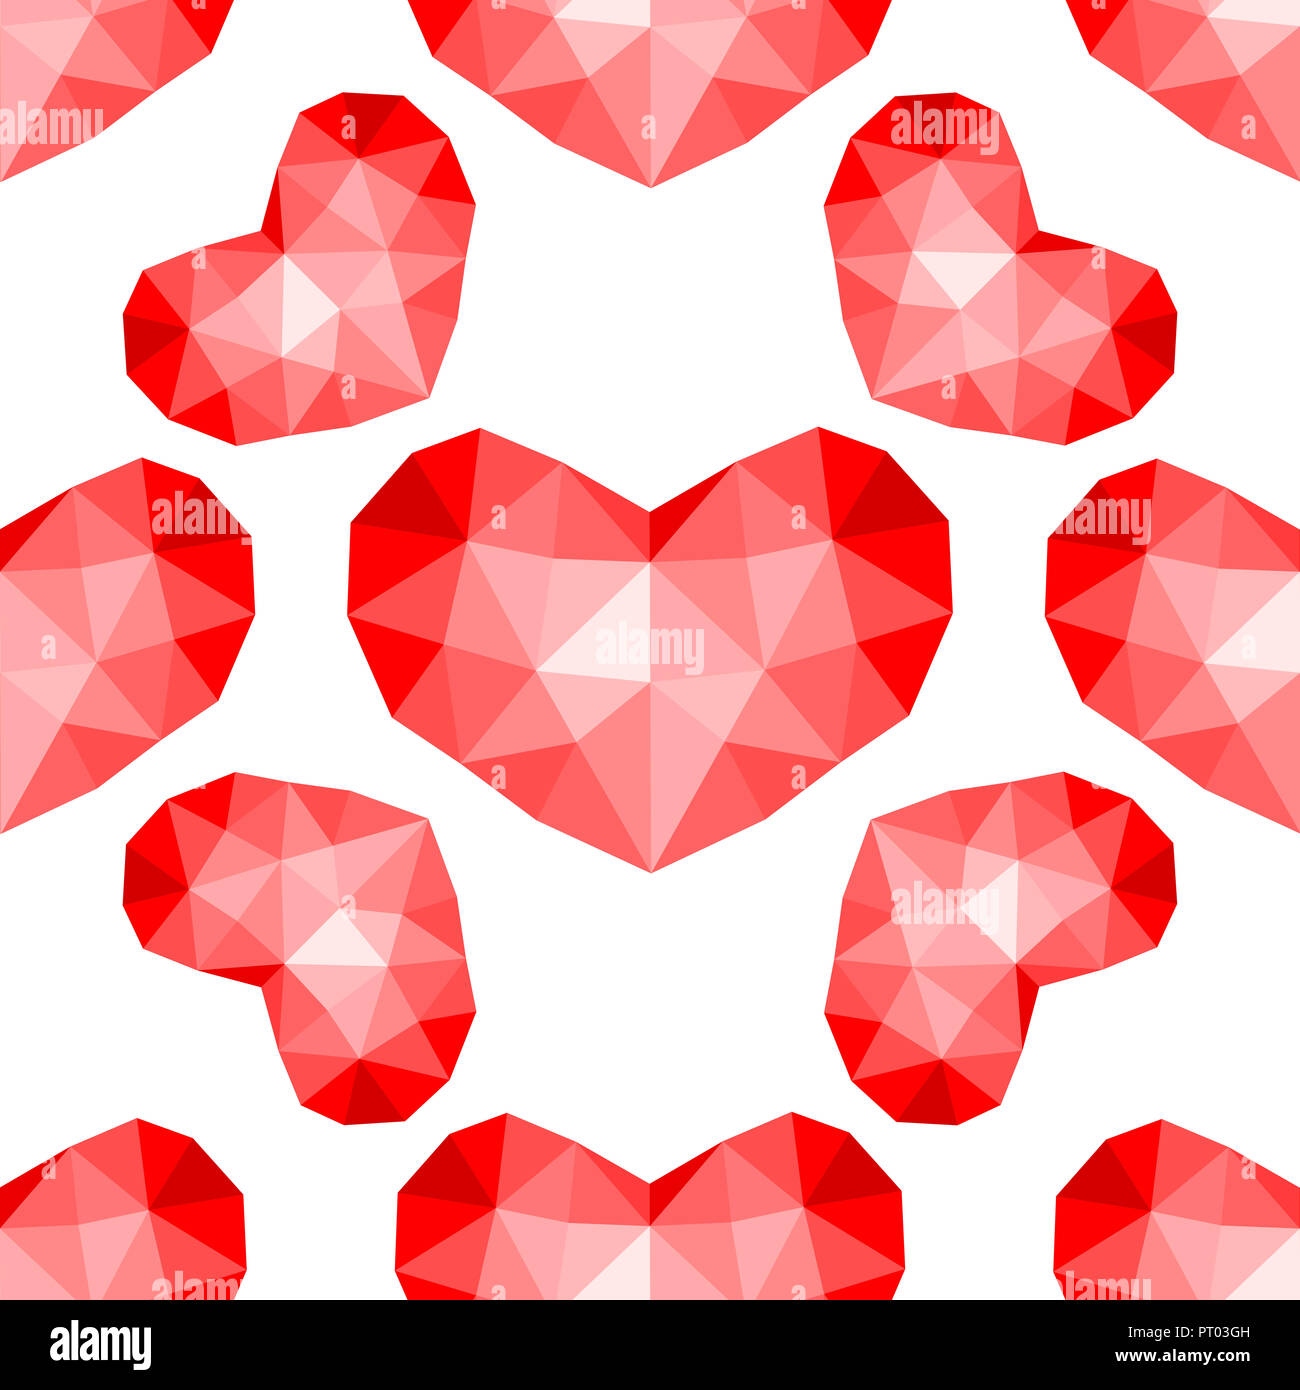 seamless pattern. Abstrakt repeating texture with chaotic hearts. Stylish hipster texture. Stock Photo